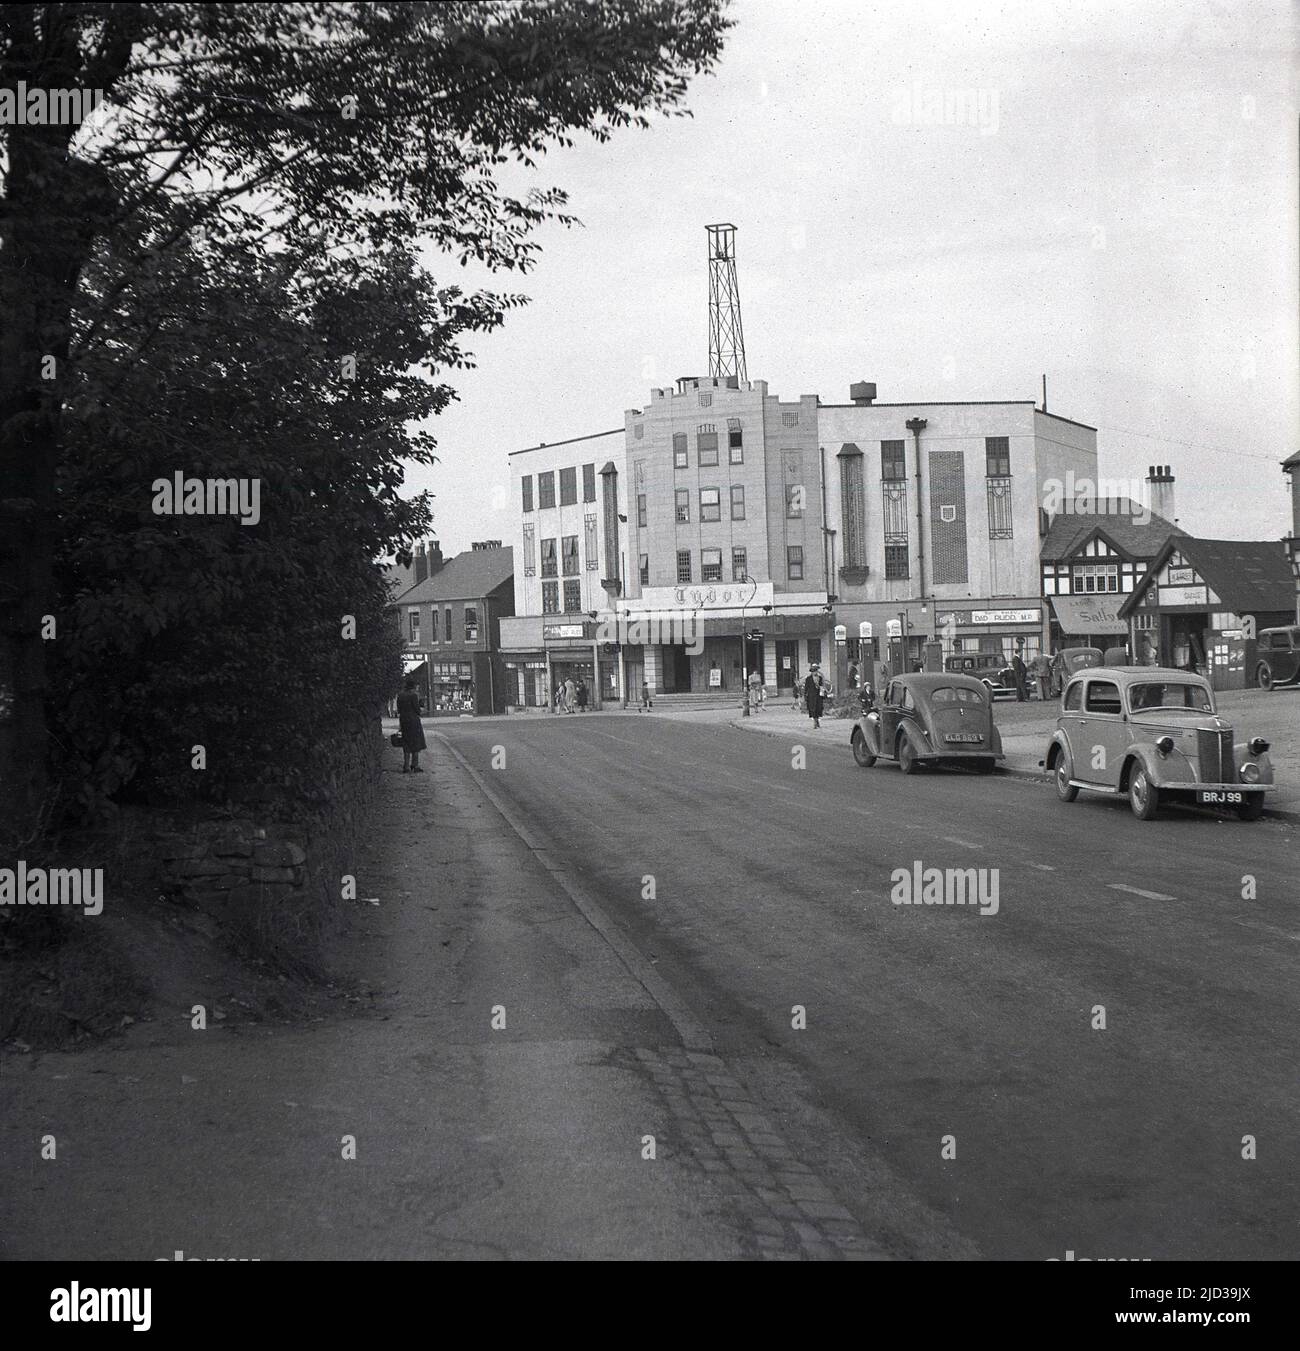 1940, historical, distance view of the Tudor cinema at Bramhall, Stockport, England, UK. Located on a corner site with Woodford Road and Meadway, the building was designed by architect George Clayton, with the auditorium decorated in a Tudor style and opened on 31st March 1935 with Clark Gable in “It Happened One Night”. This picture, taken in 1940, saw the film 'Dad Rudd MP' being shown. Cars of the era can be seen parked on the road. Stock Photo